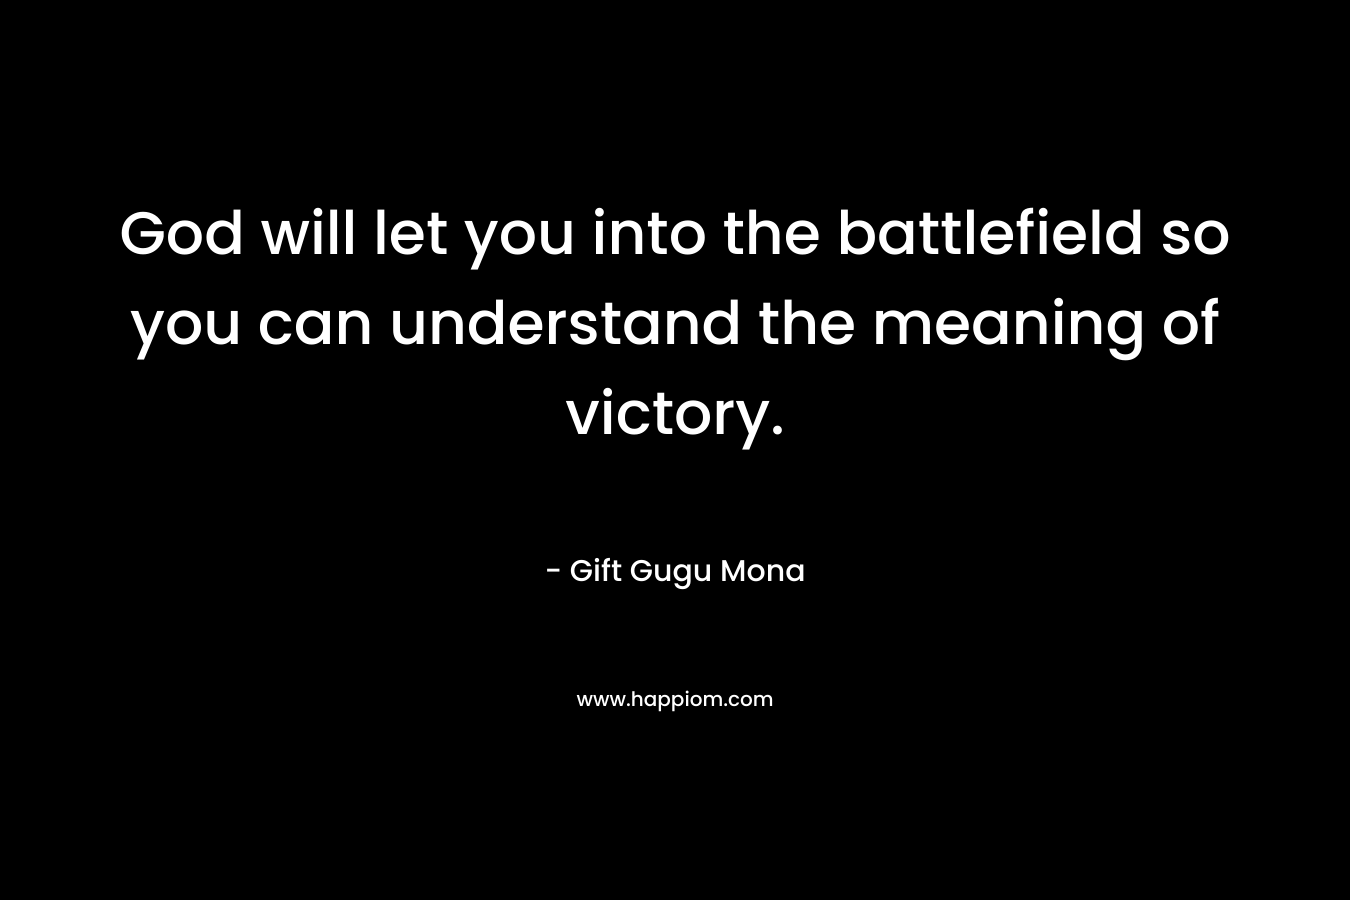 God will let you into the battlefield so you can understand the meaning of victory. – Gift Gugu Mona